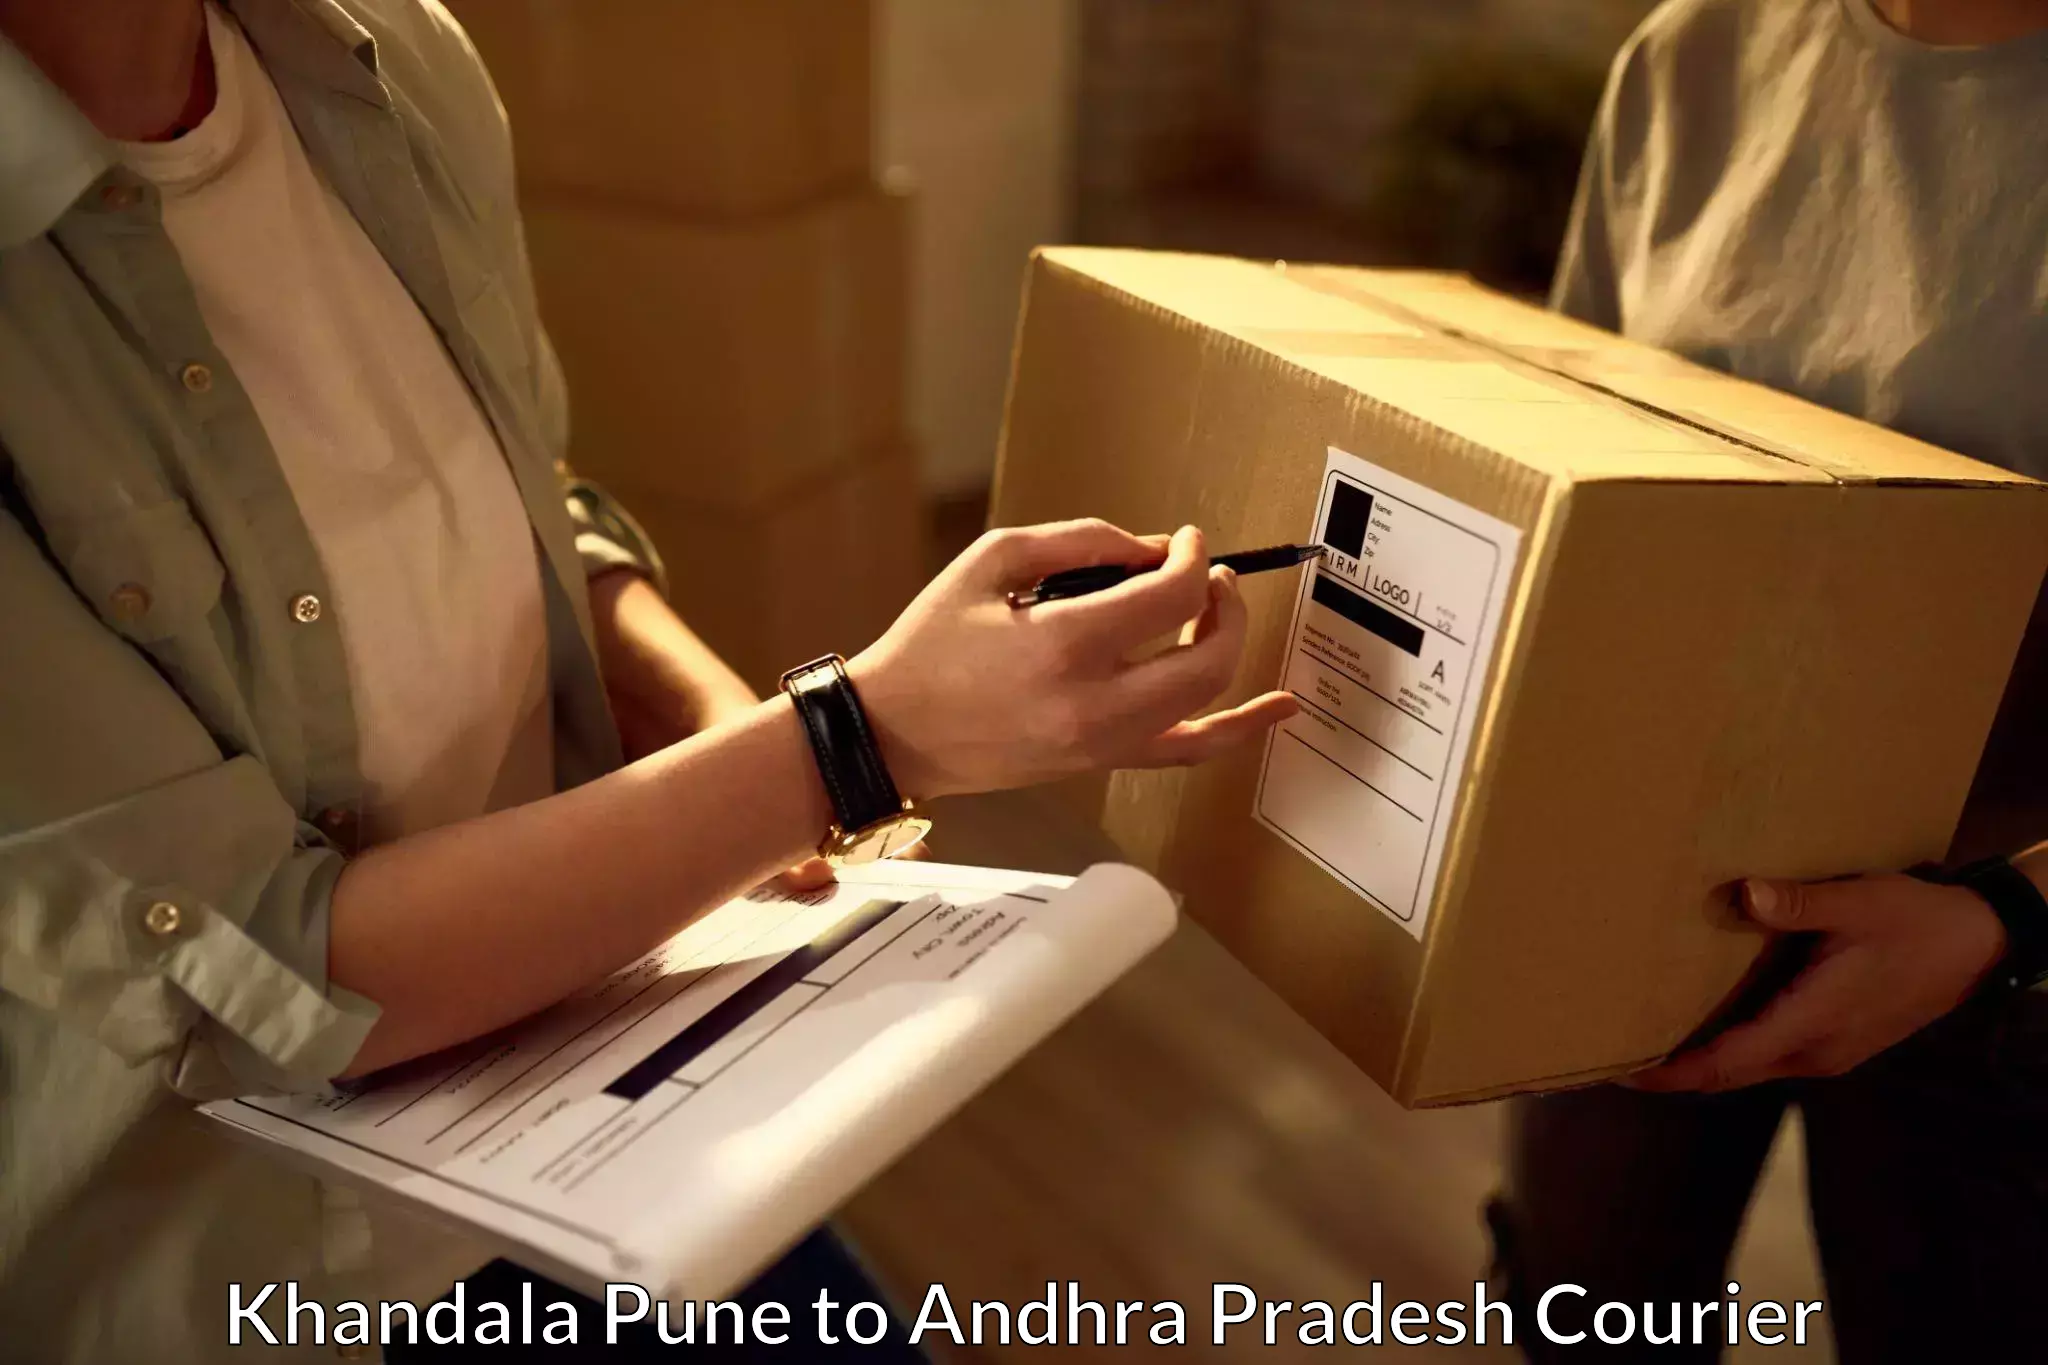 Secure package delivery Khandala Pune to Kothapalli